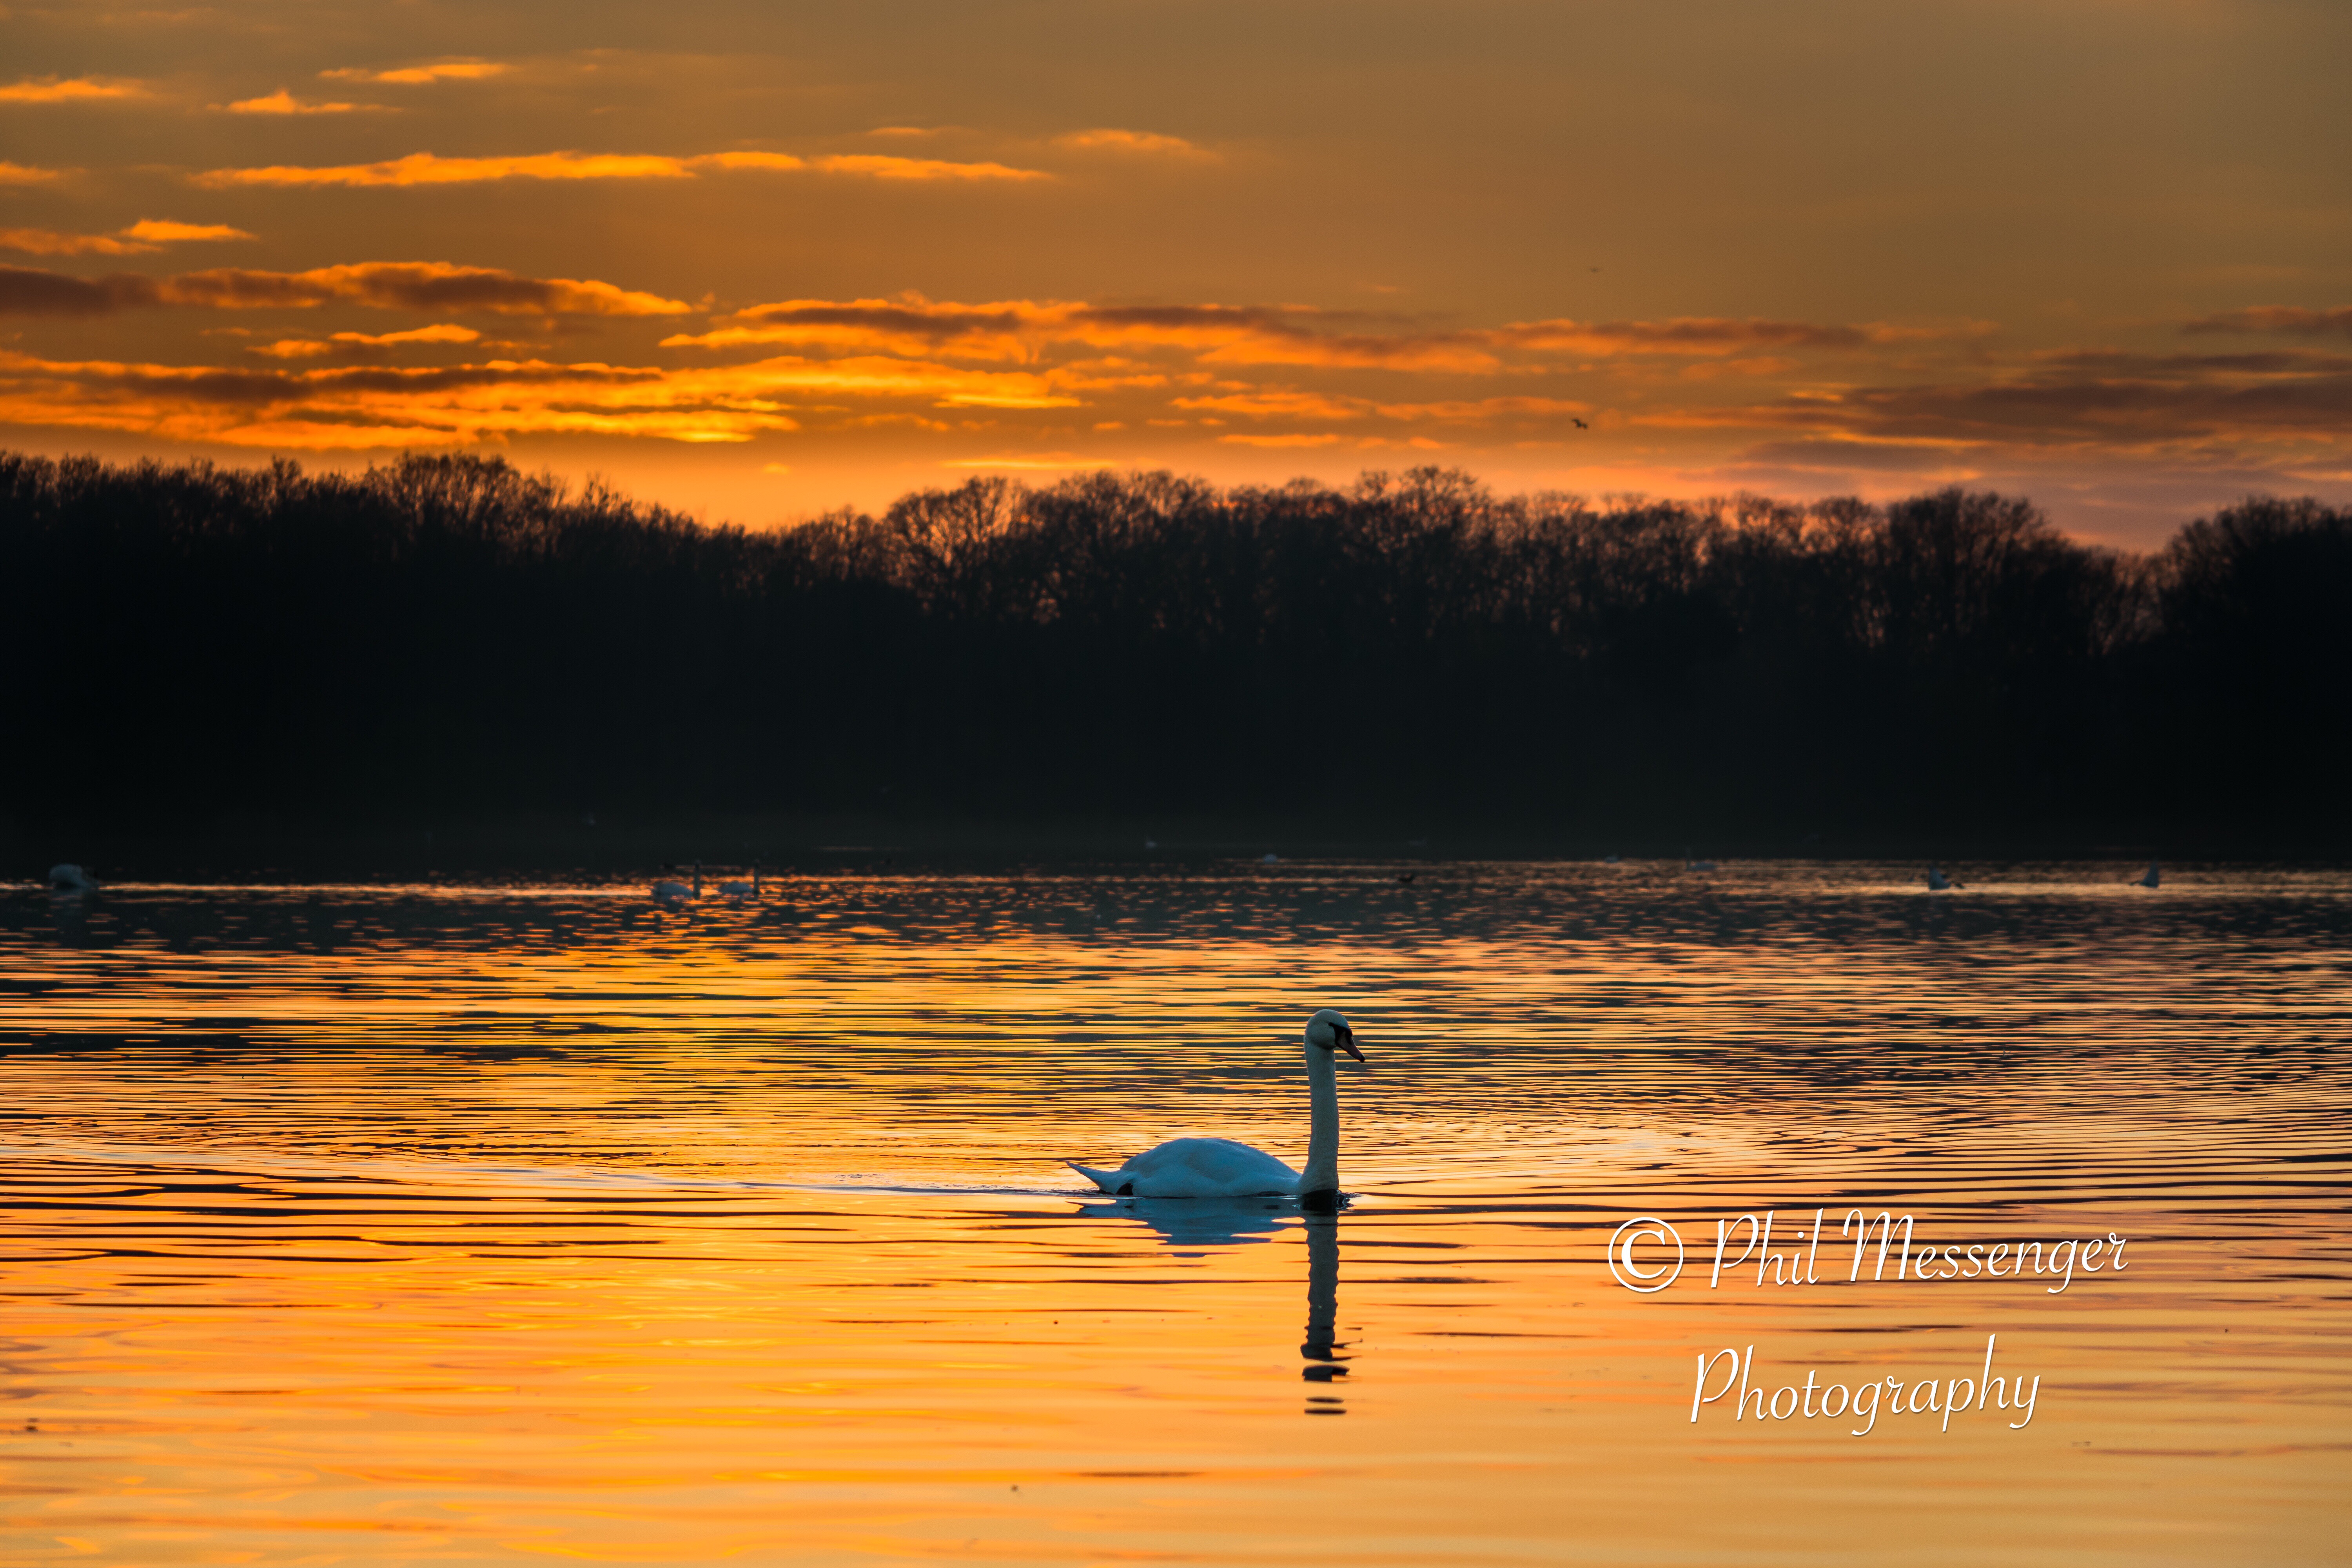 Mute swan soaking up the last light as the sun sets.